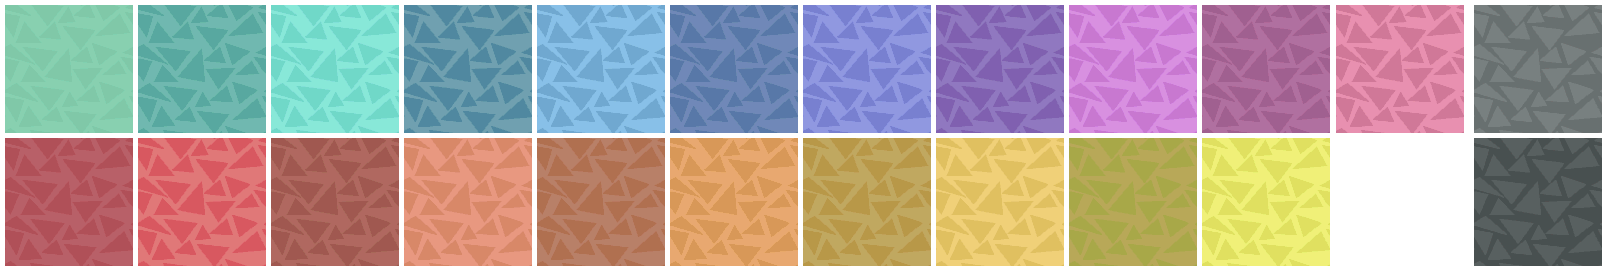 Phineas and Ferb - Triangle Textures